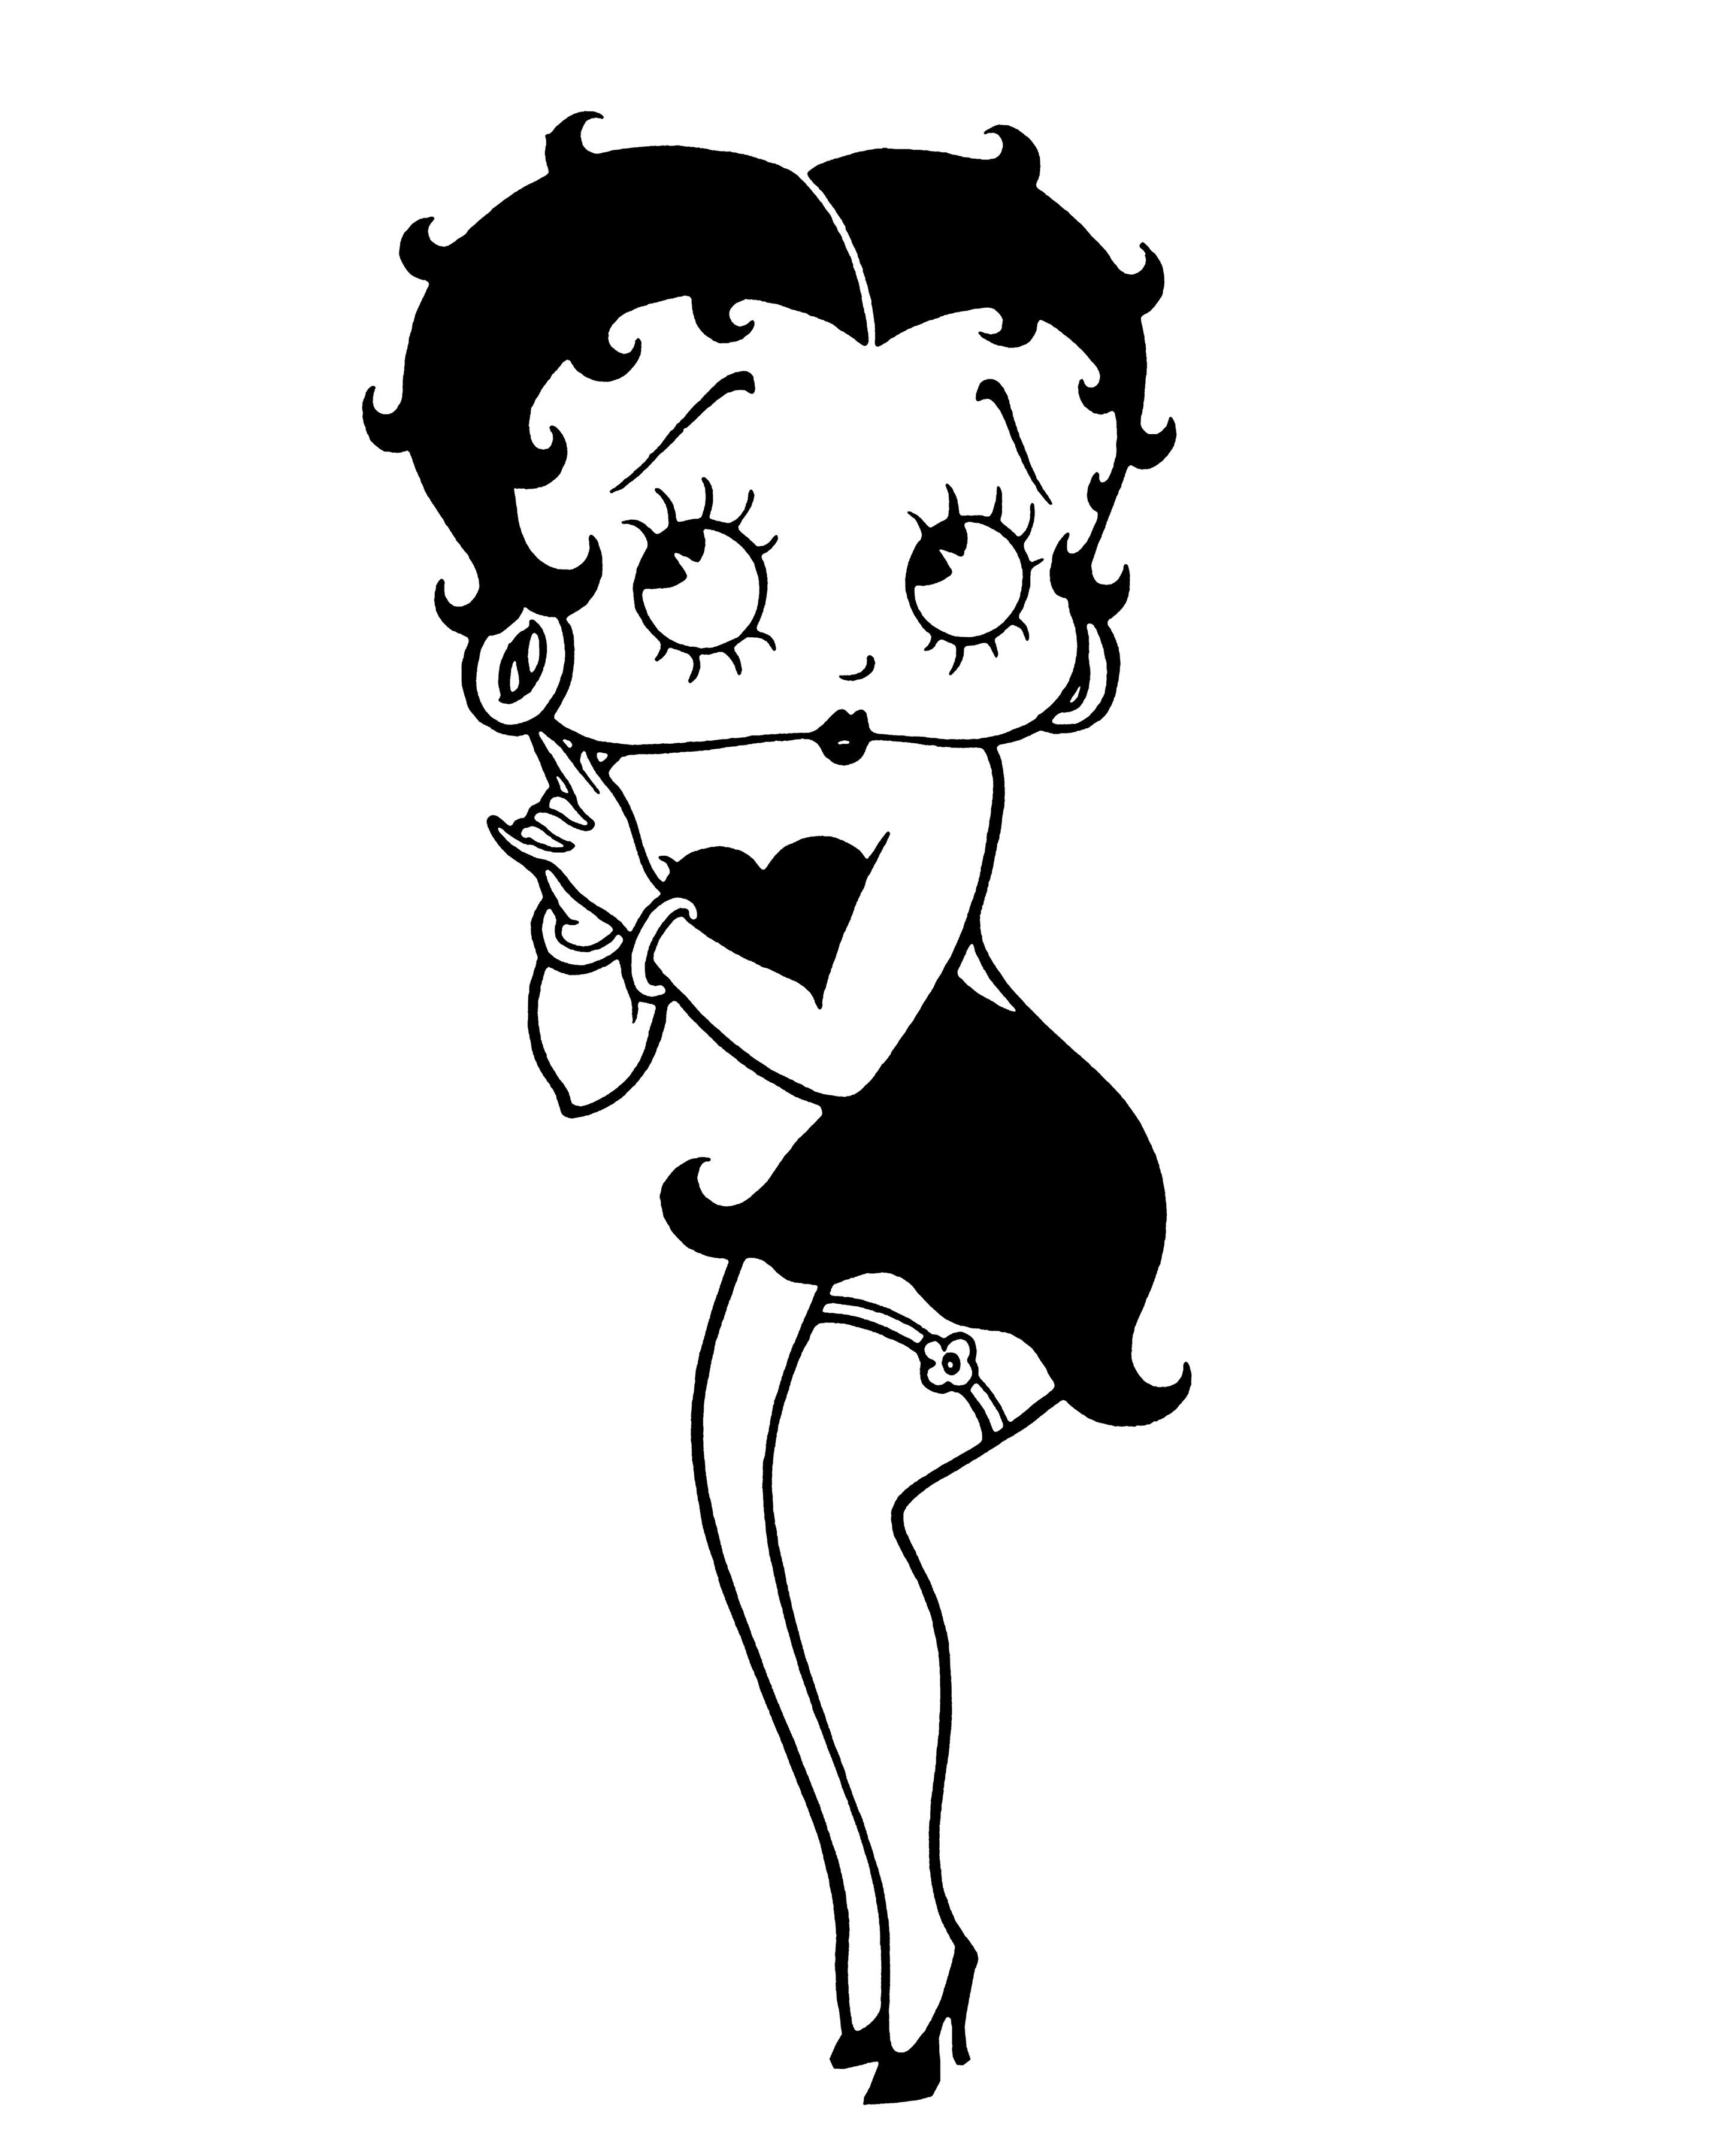 bernadette torres recommends pictures of the real betty boop pic